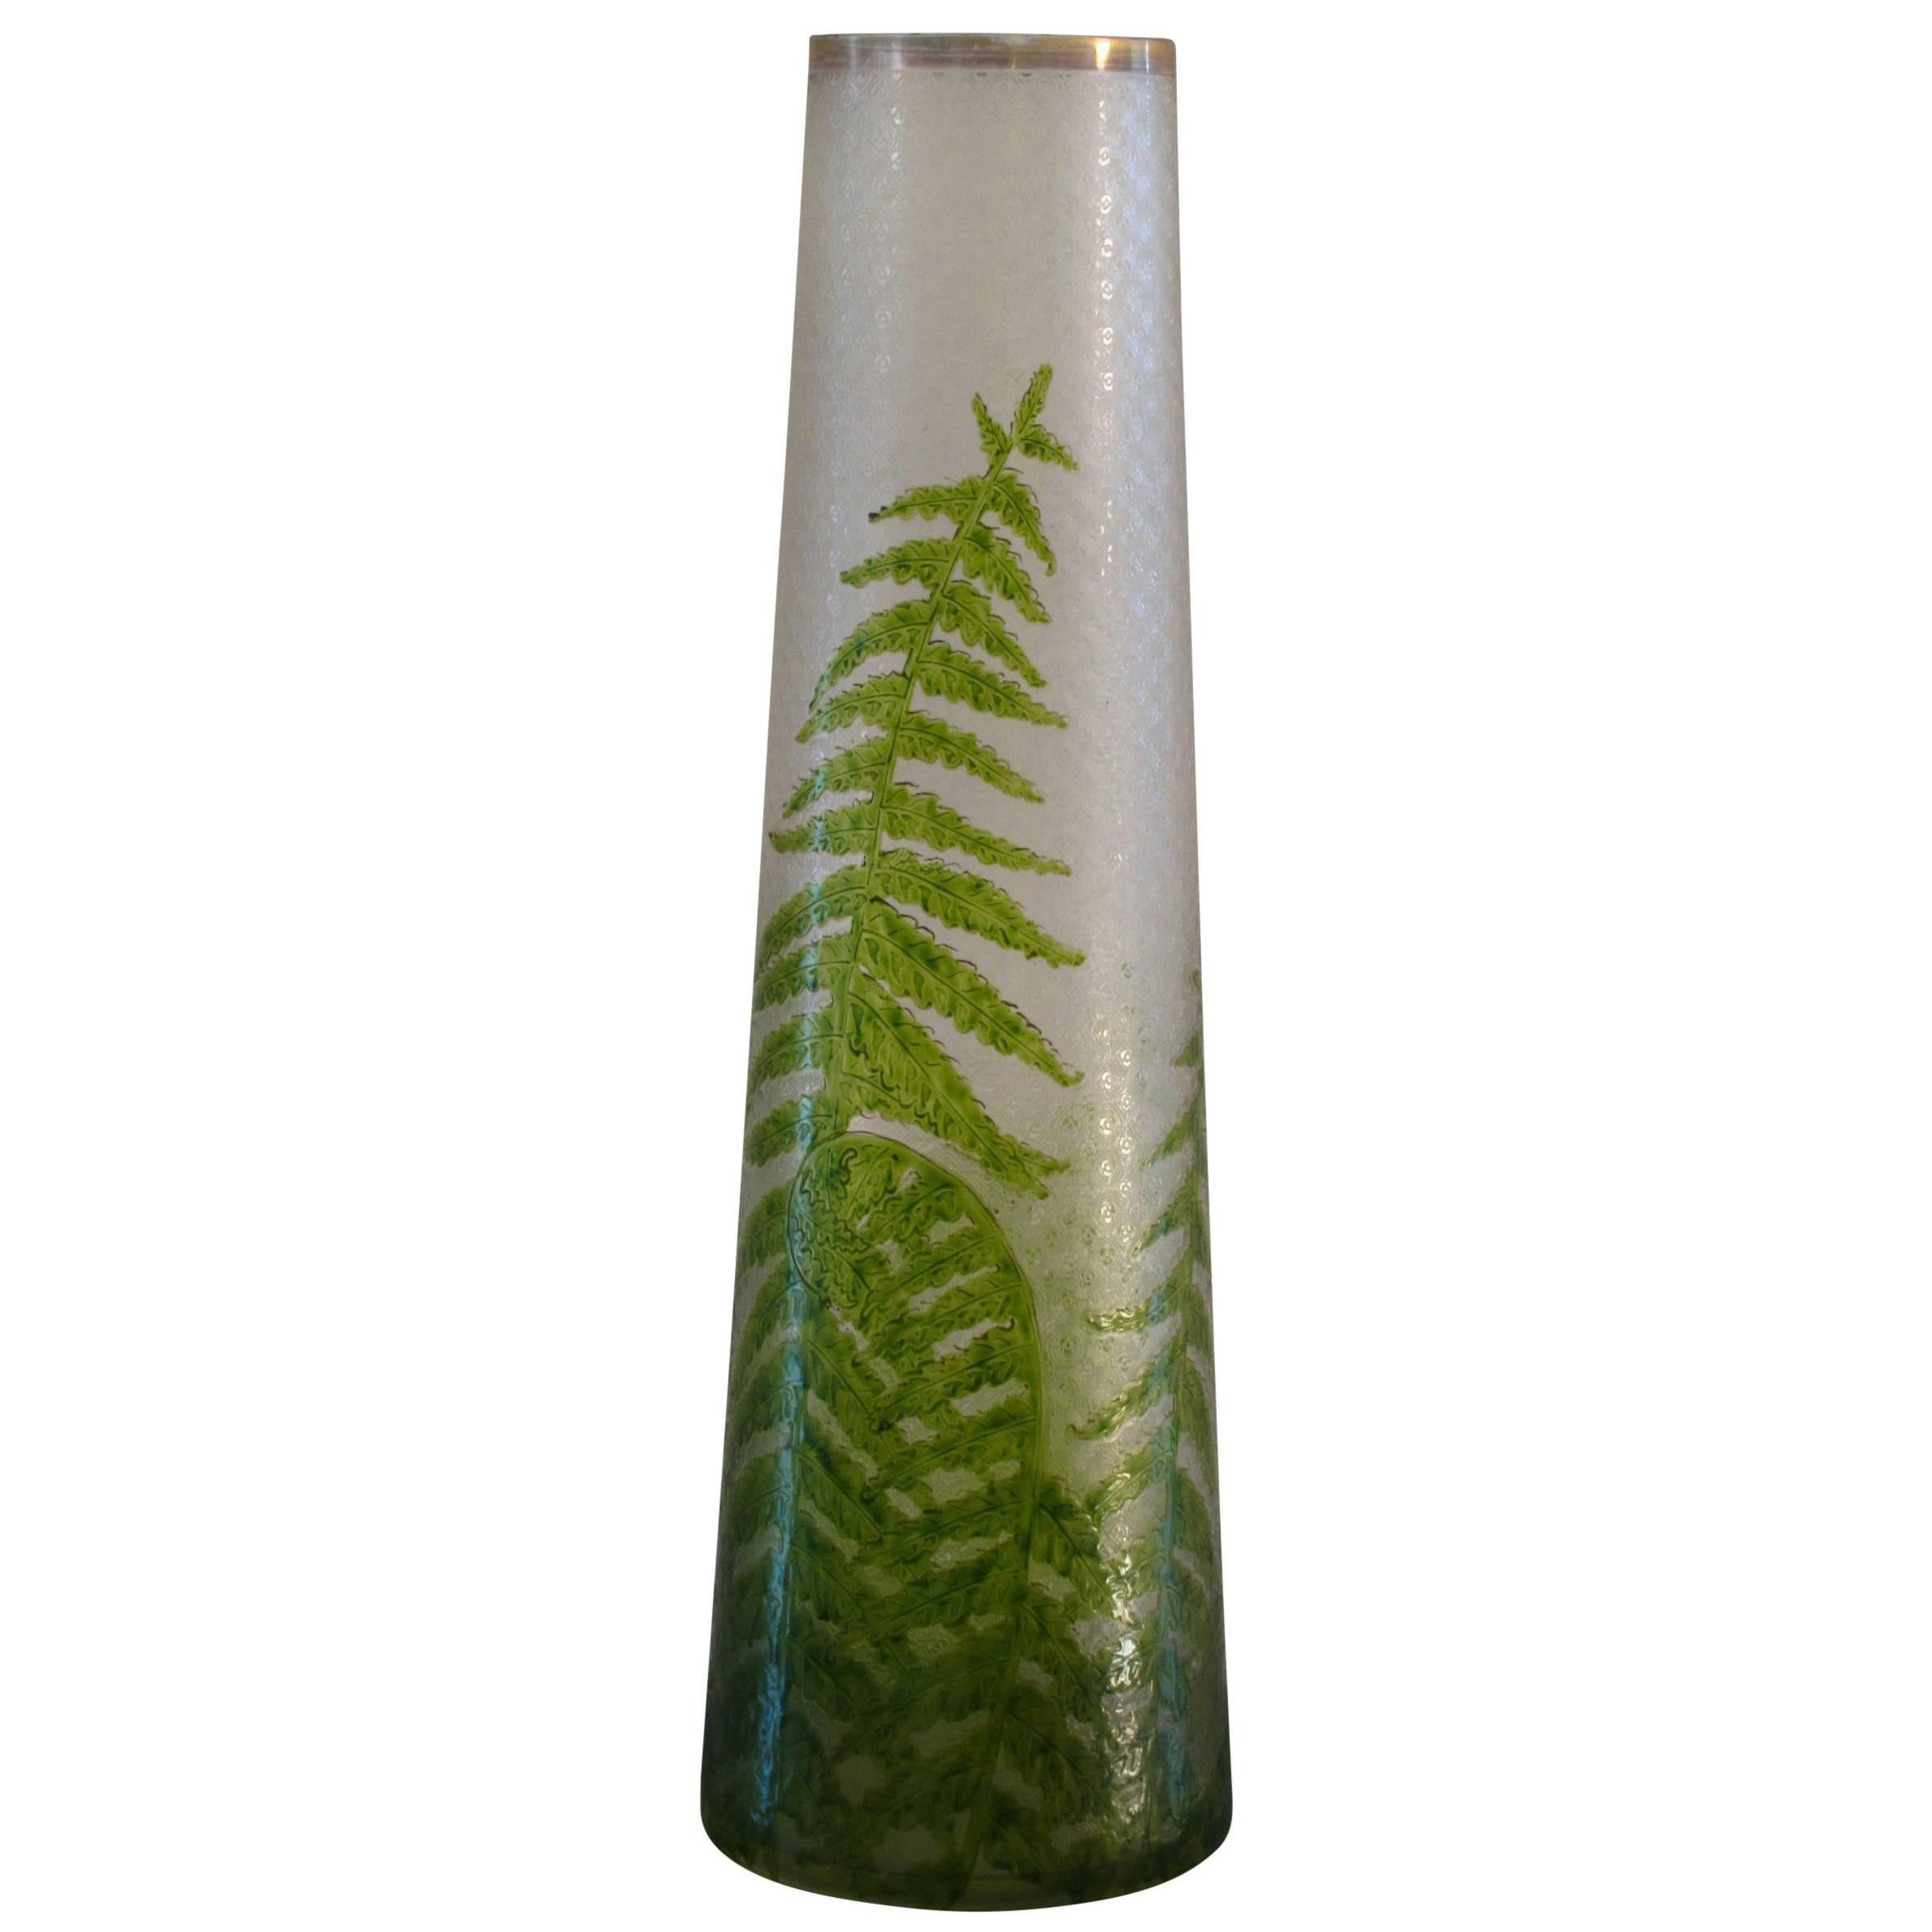 Tall French Textured Art Glass Vase with Hand-Painted Fern Design, 1920s